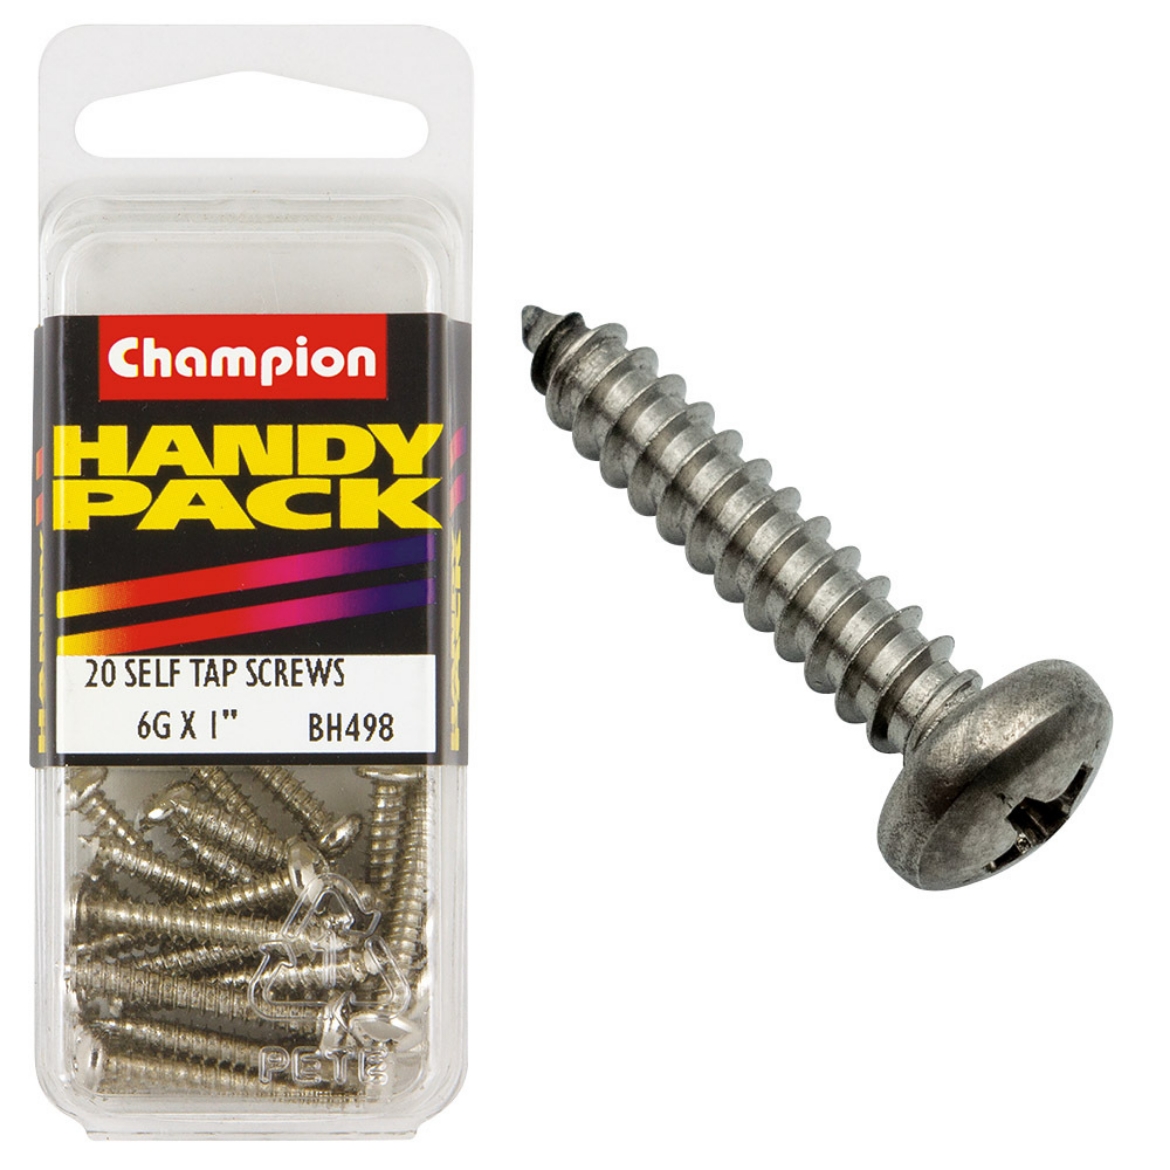 Picture of Handy Pk Self Tap Screw pan head 8g x 1 CST (Pkt.20)